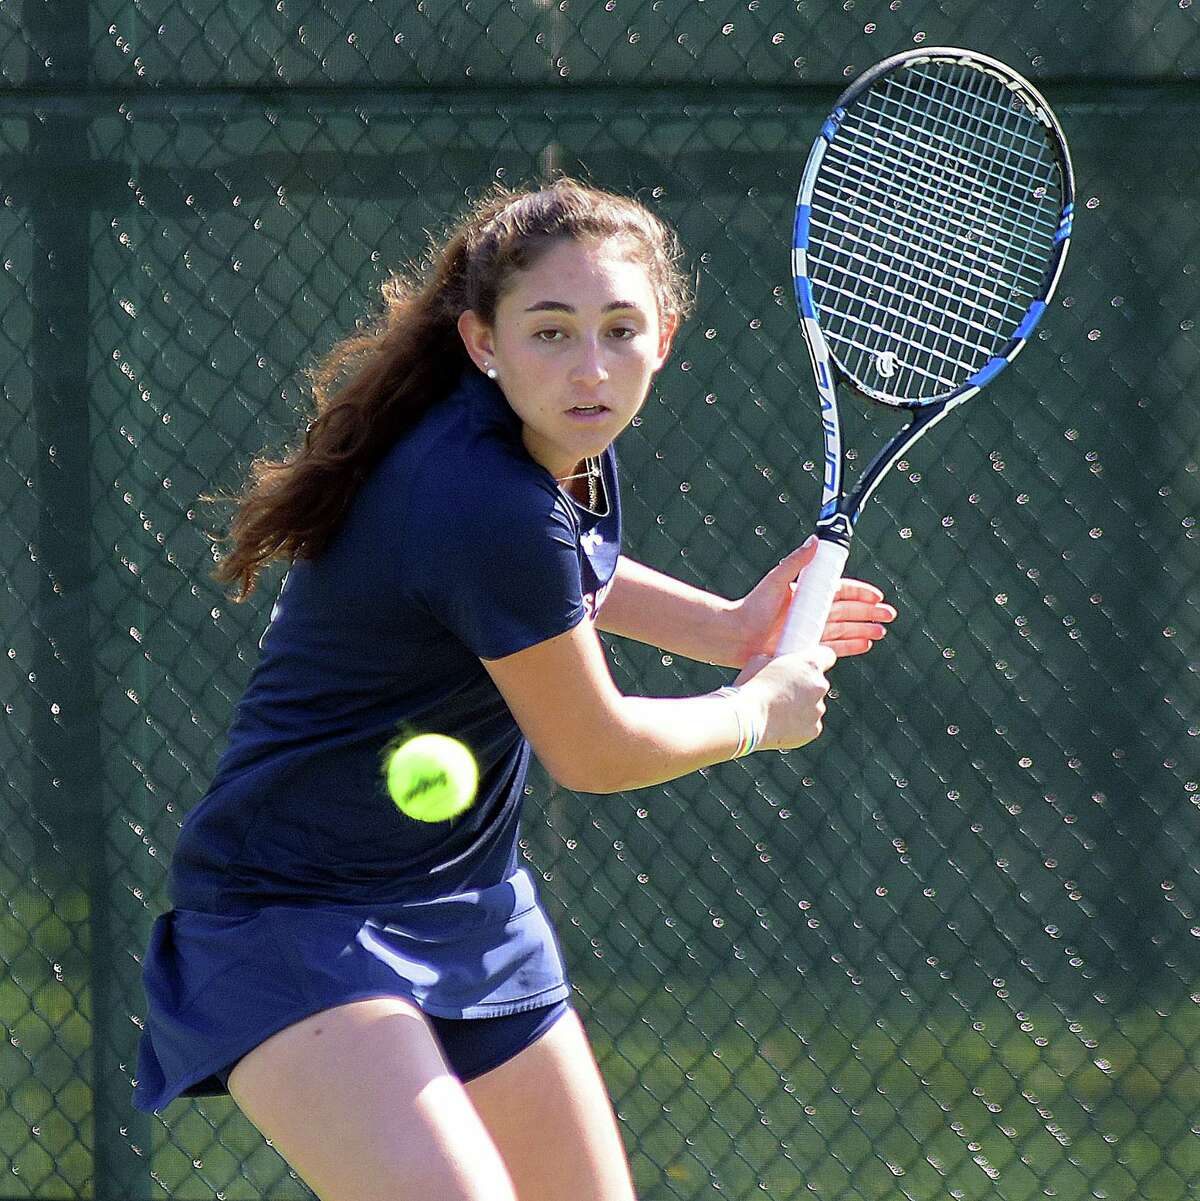 GFA girls tennis player Devon Wolfe, a resident of Darien, has won seven matches in a row for the Dragons, including four last week.